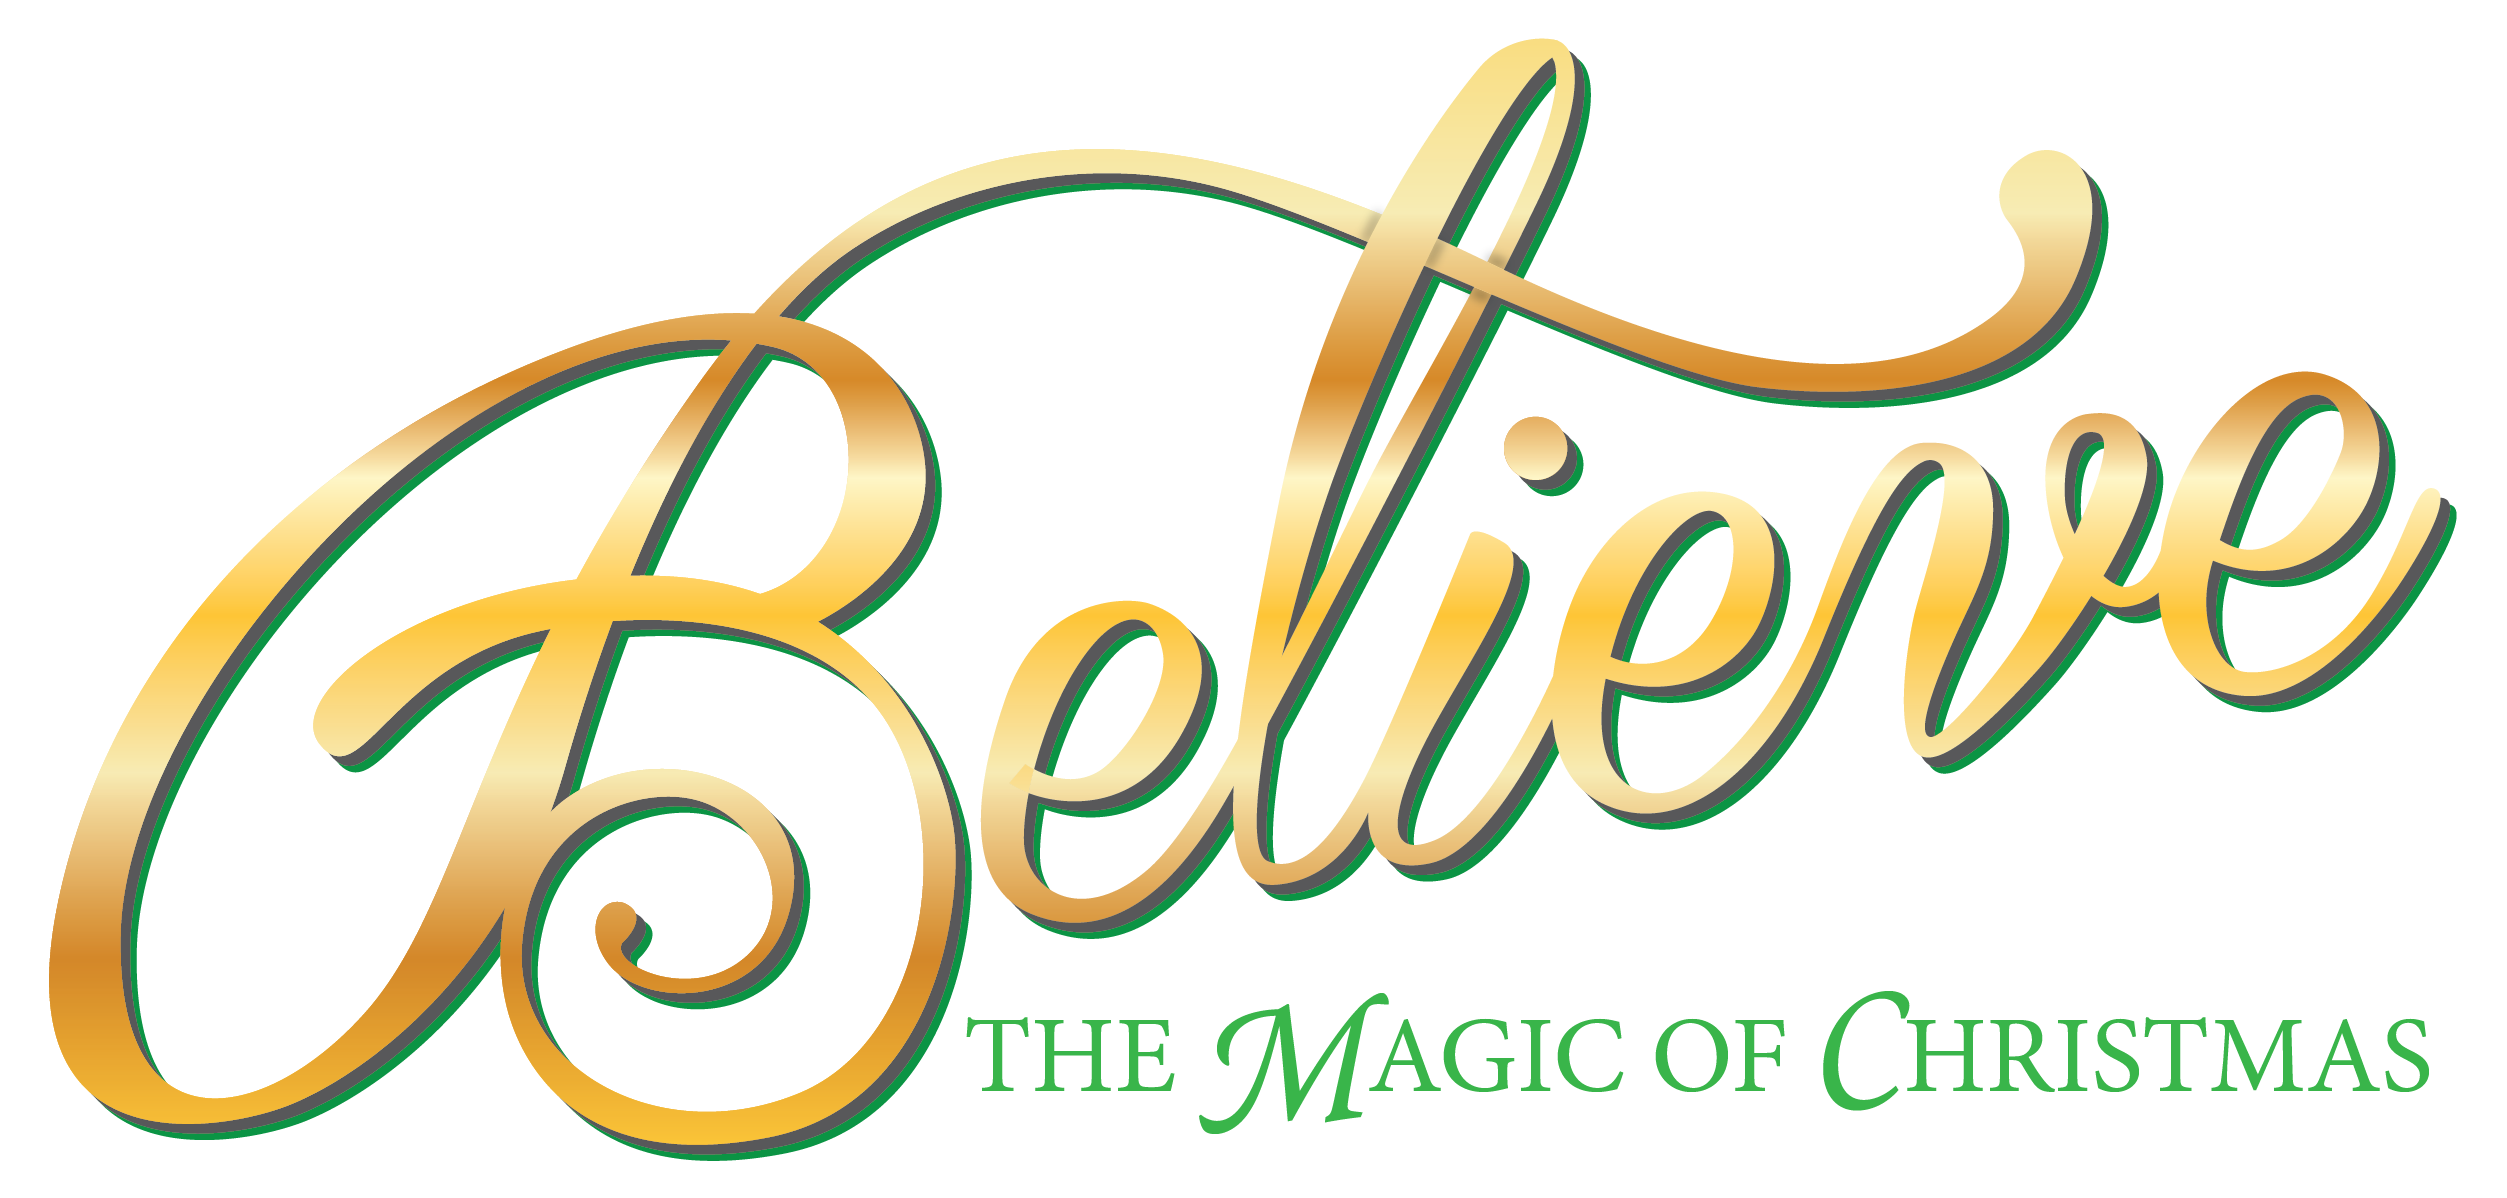 Believe - The Magic of Christmas